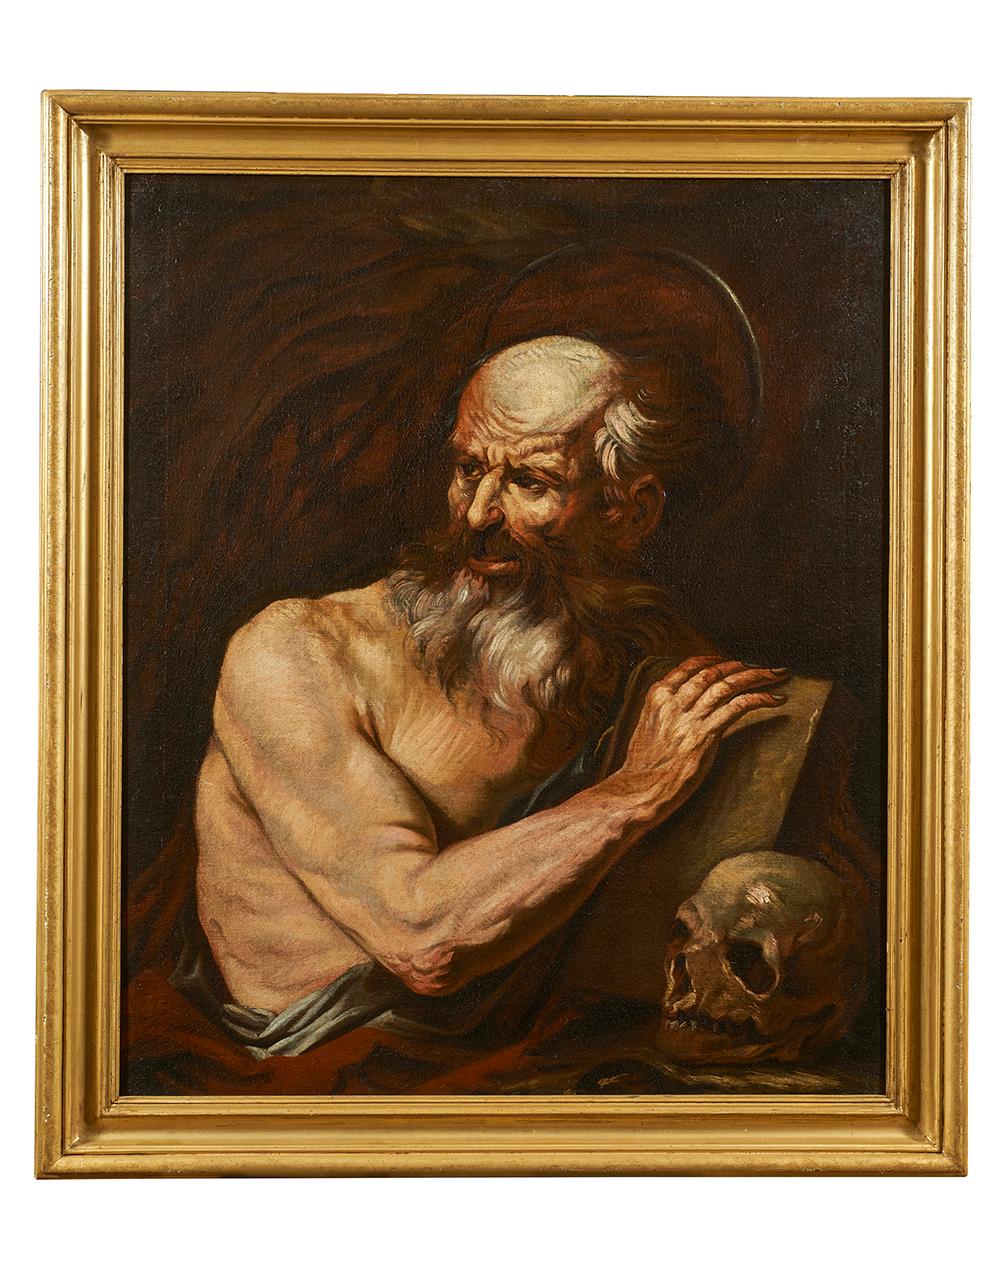 Painting, oil on canvas, with dimensions of 92 x 77 without frame and 107 x 82 cm with frame, depicting a Saint Gerolamo in the ancient philosopher and ascetic version, typical of the greatest tradition of the Neapolitan baroque of the